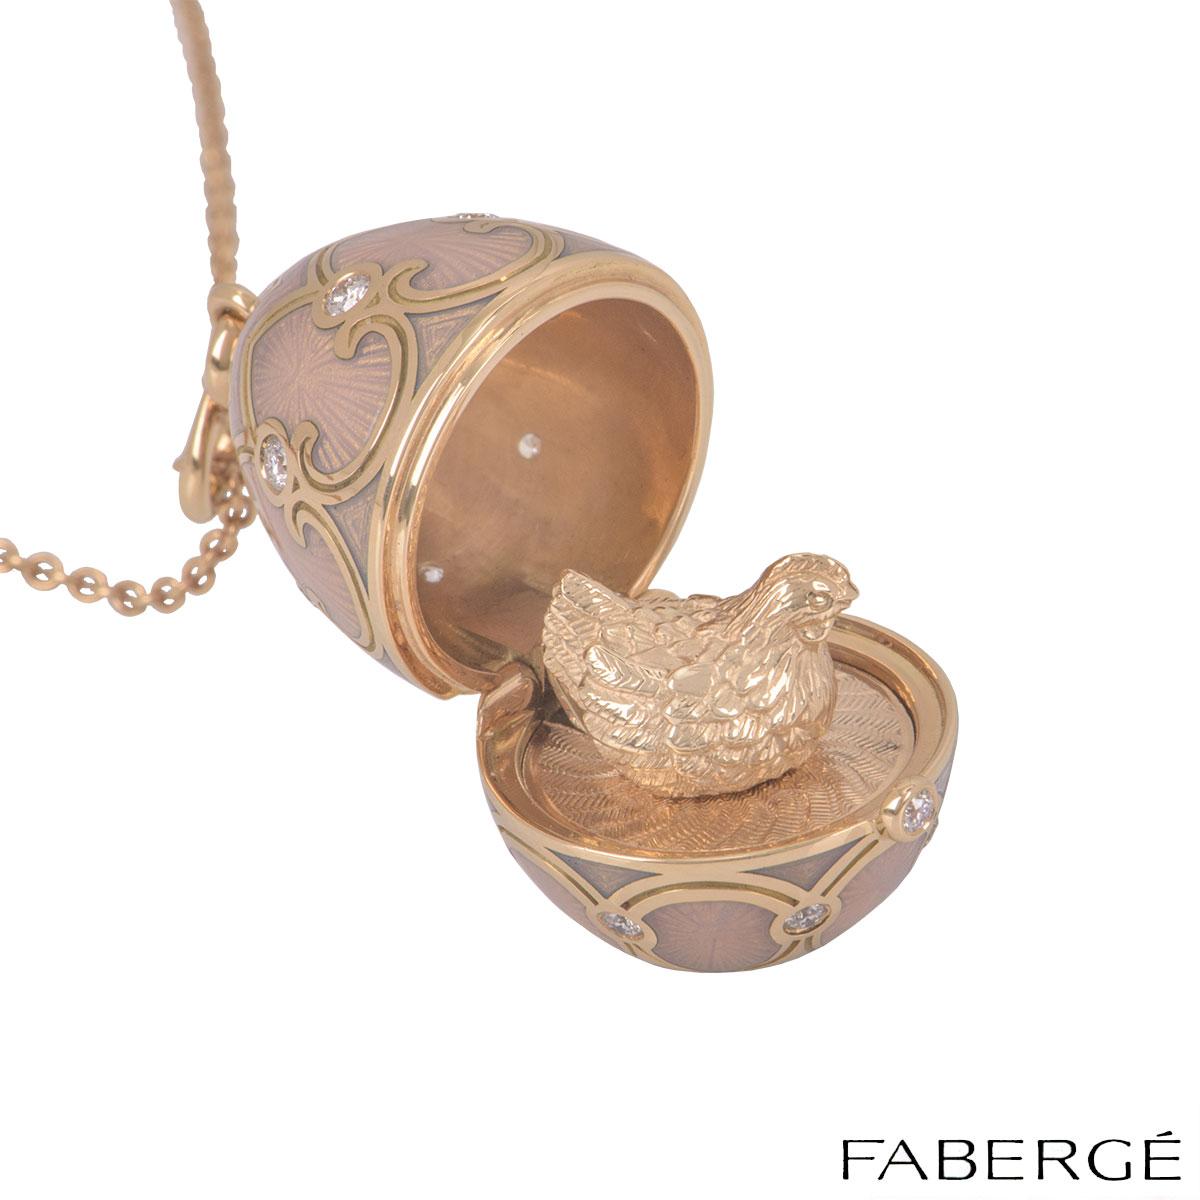 An 18k rose gold, pink guilloché enamel and diamonds egg pendant by Faberge from the Heritage Collection. The pendant is set in rose gold featuring opalescent pink guilloché enamel with round brilliant cut diamonds placed evenly on top and bottom